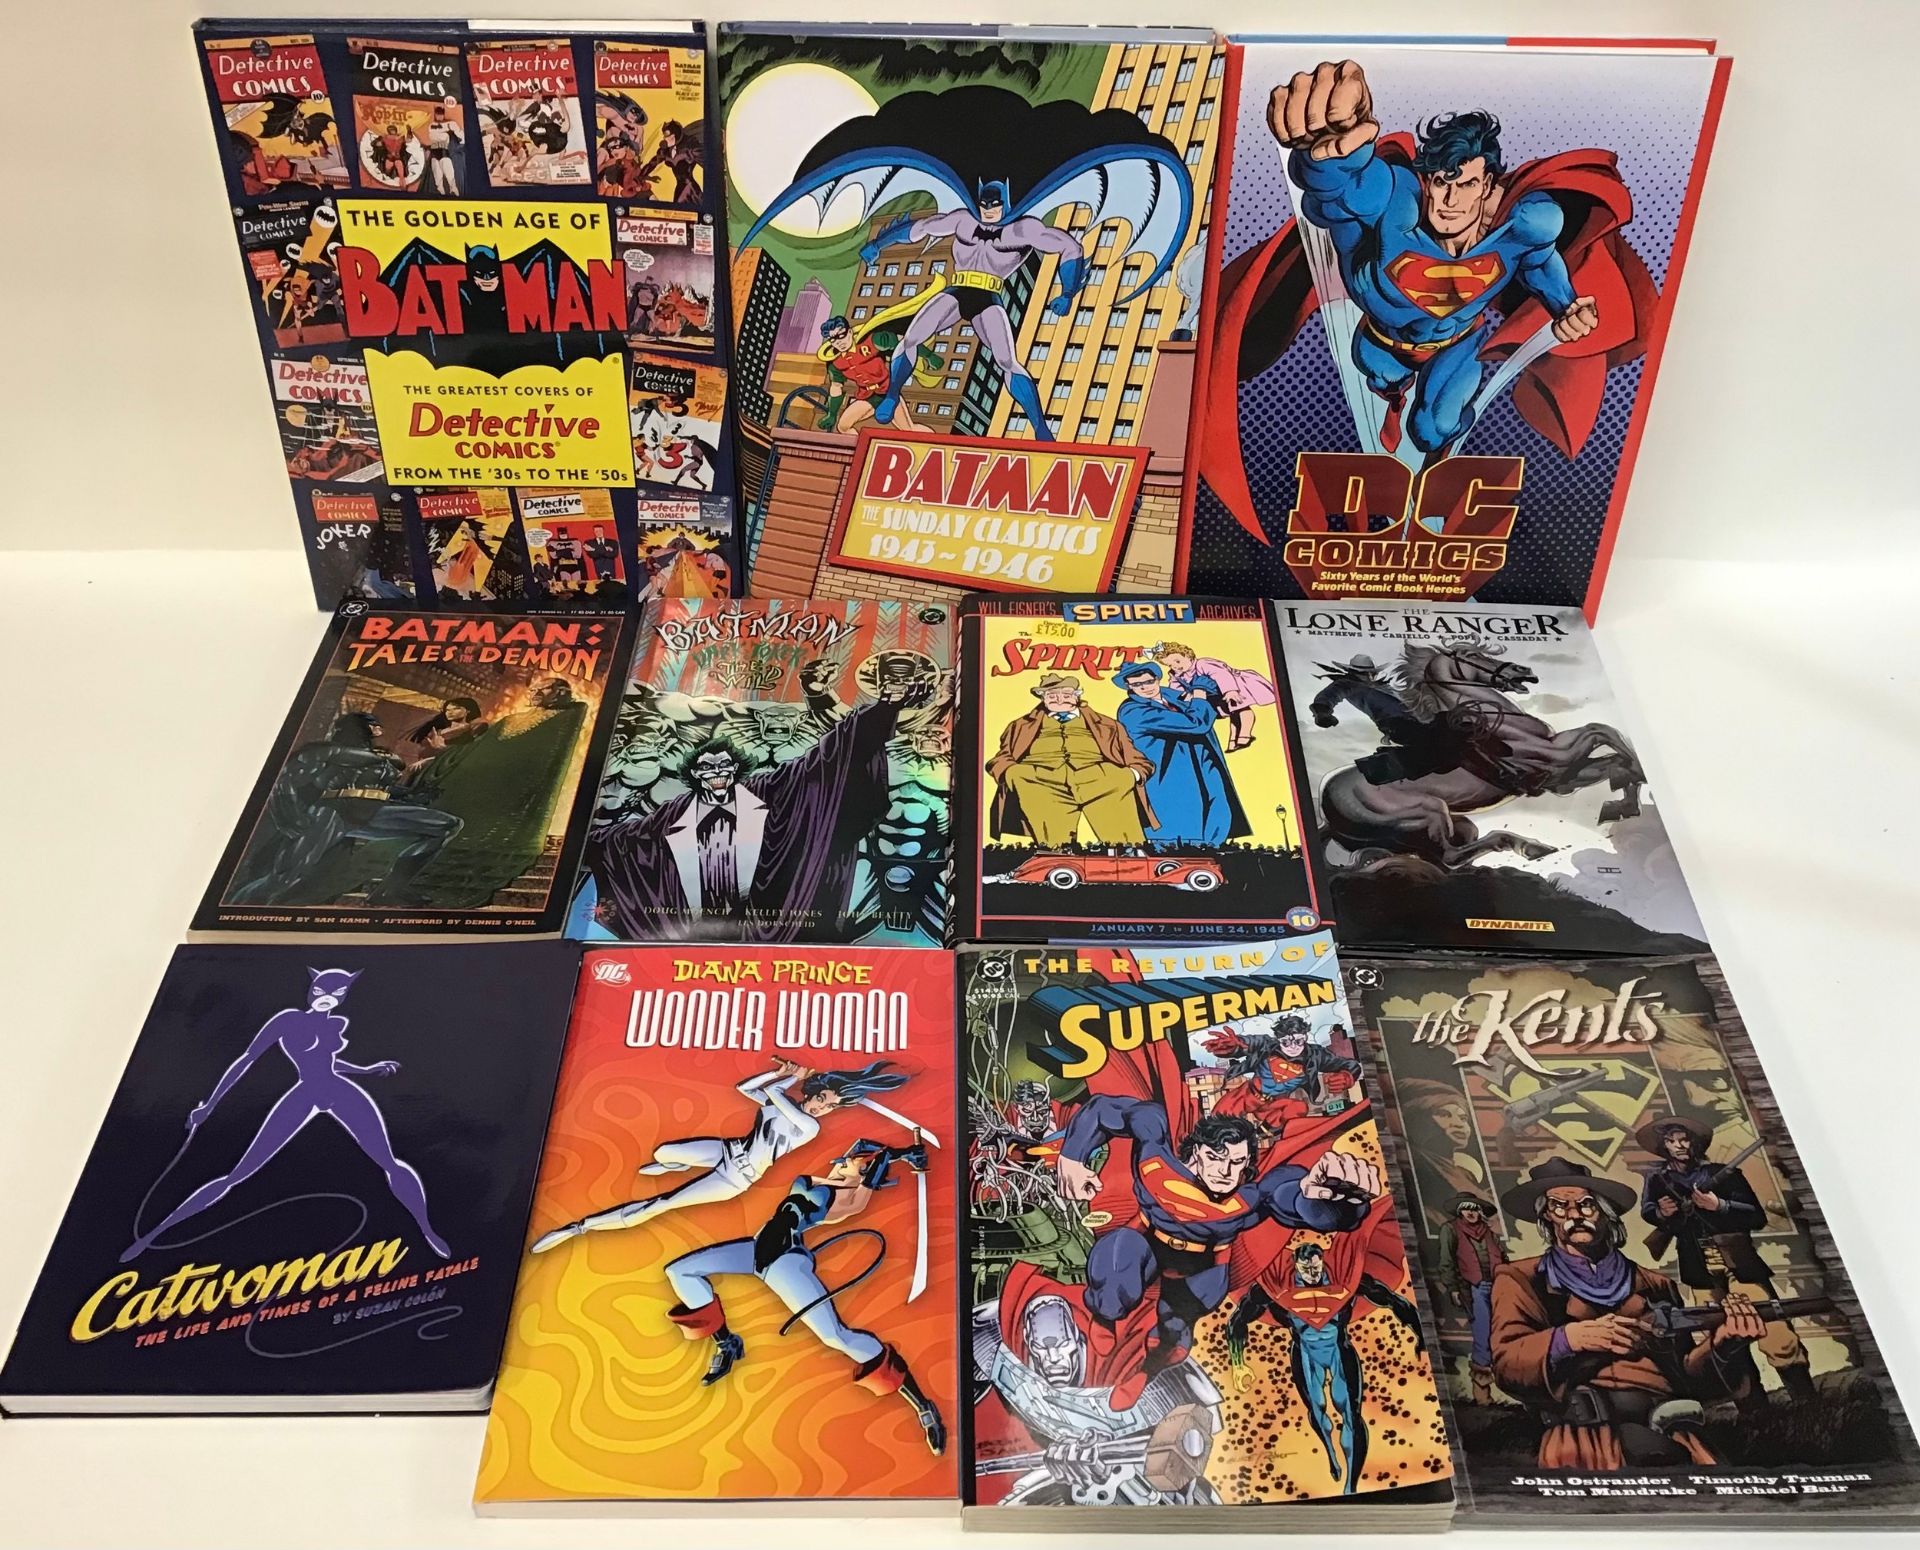 Collection of hard and soft back books relating to comic book heroes. Found in Excellent conditions. - Image 2 of 2